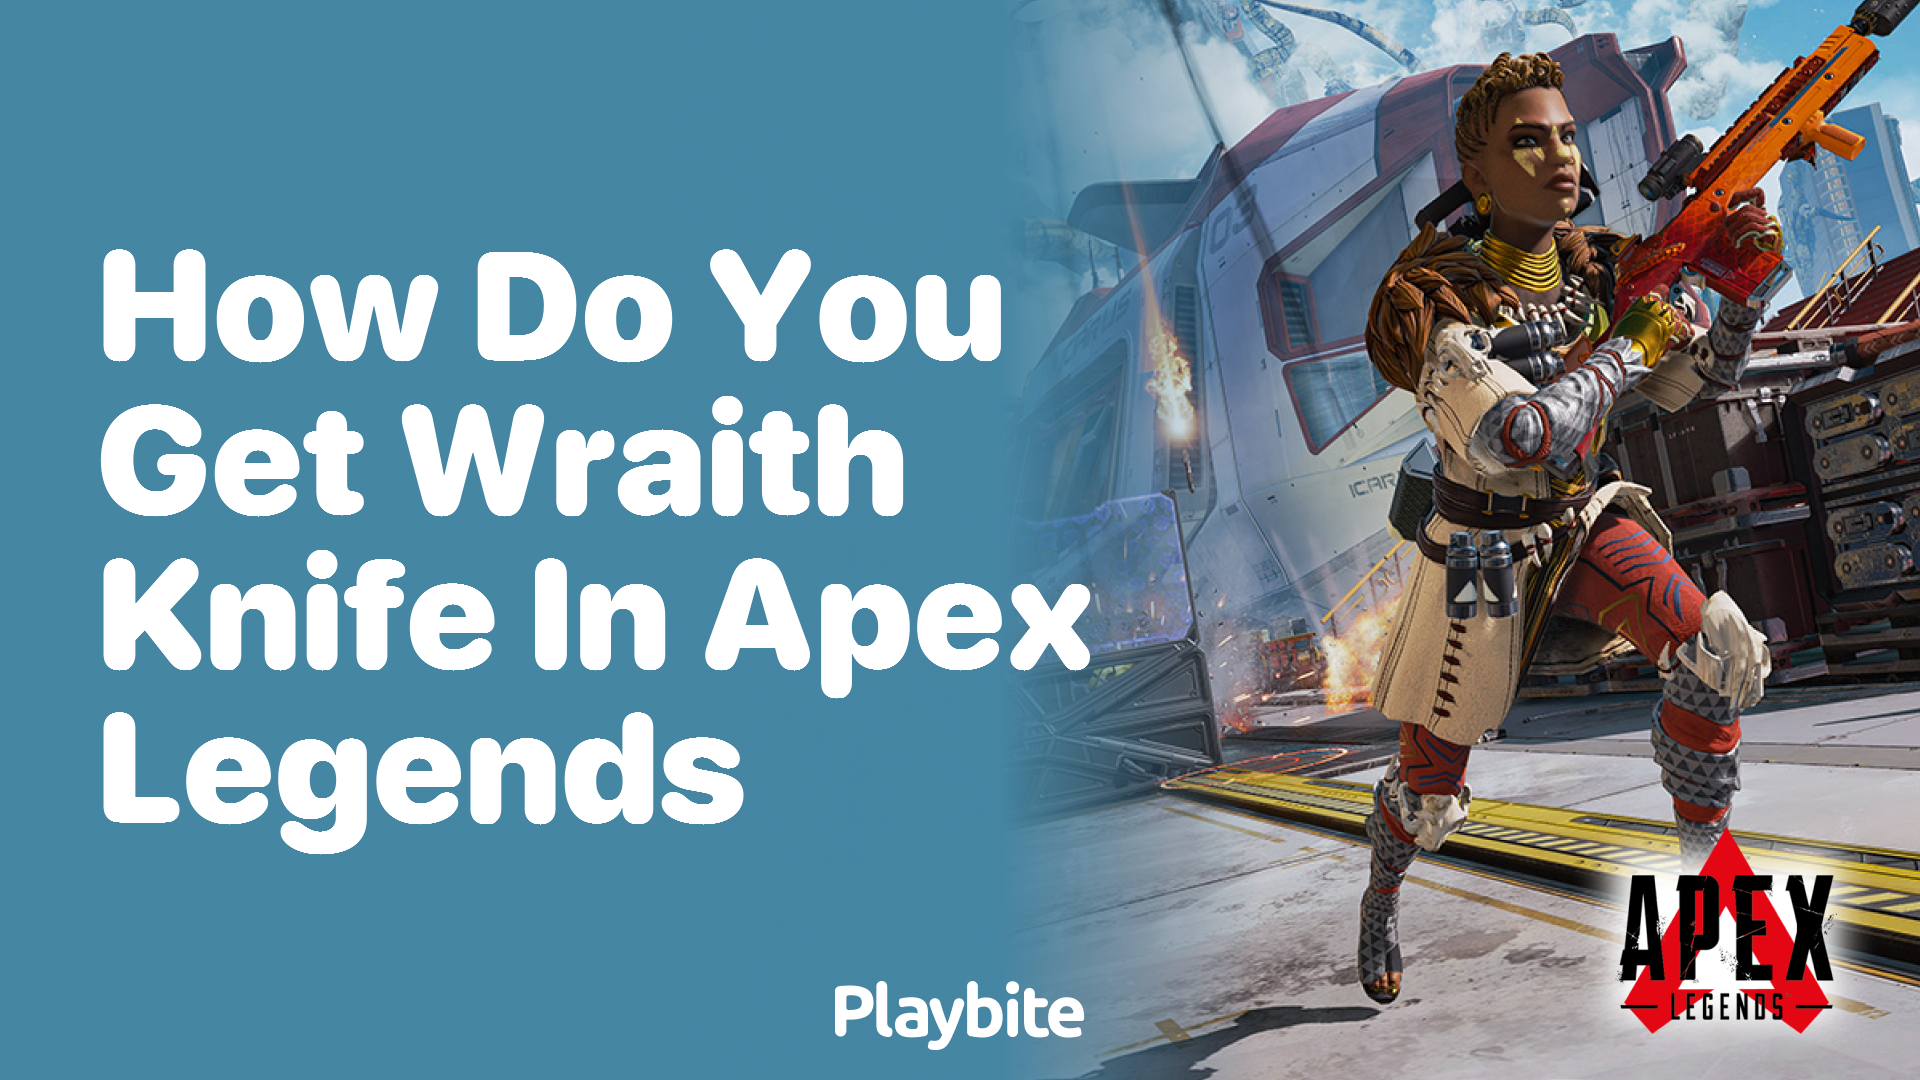 How do you get the Wraith knife in Apex Legends?